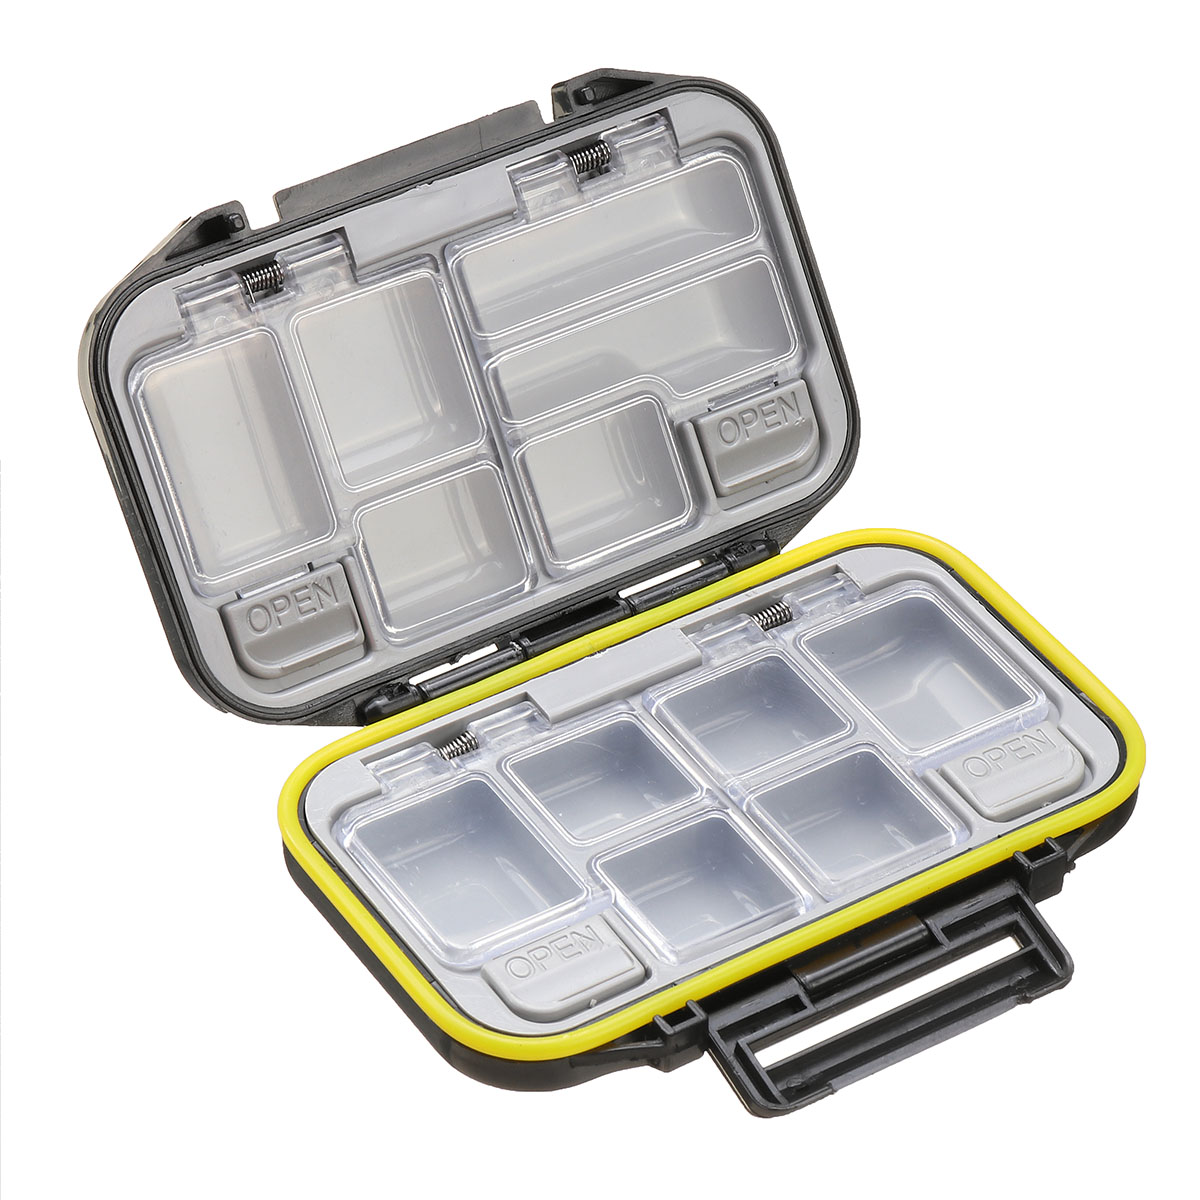 Waterproof-Fishing-Lure-Storage-Case-Double-Side-Sea-Boat-Distance-Carp-Fly-Tackle-Box-1809116-11